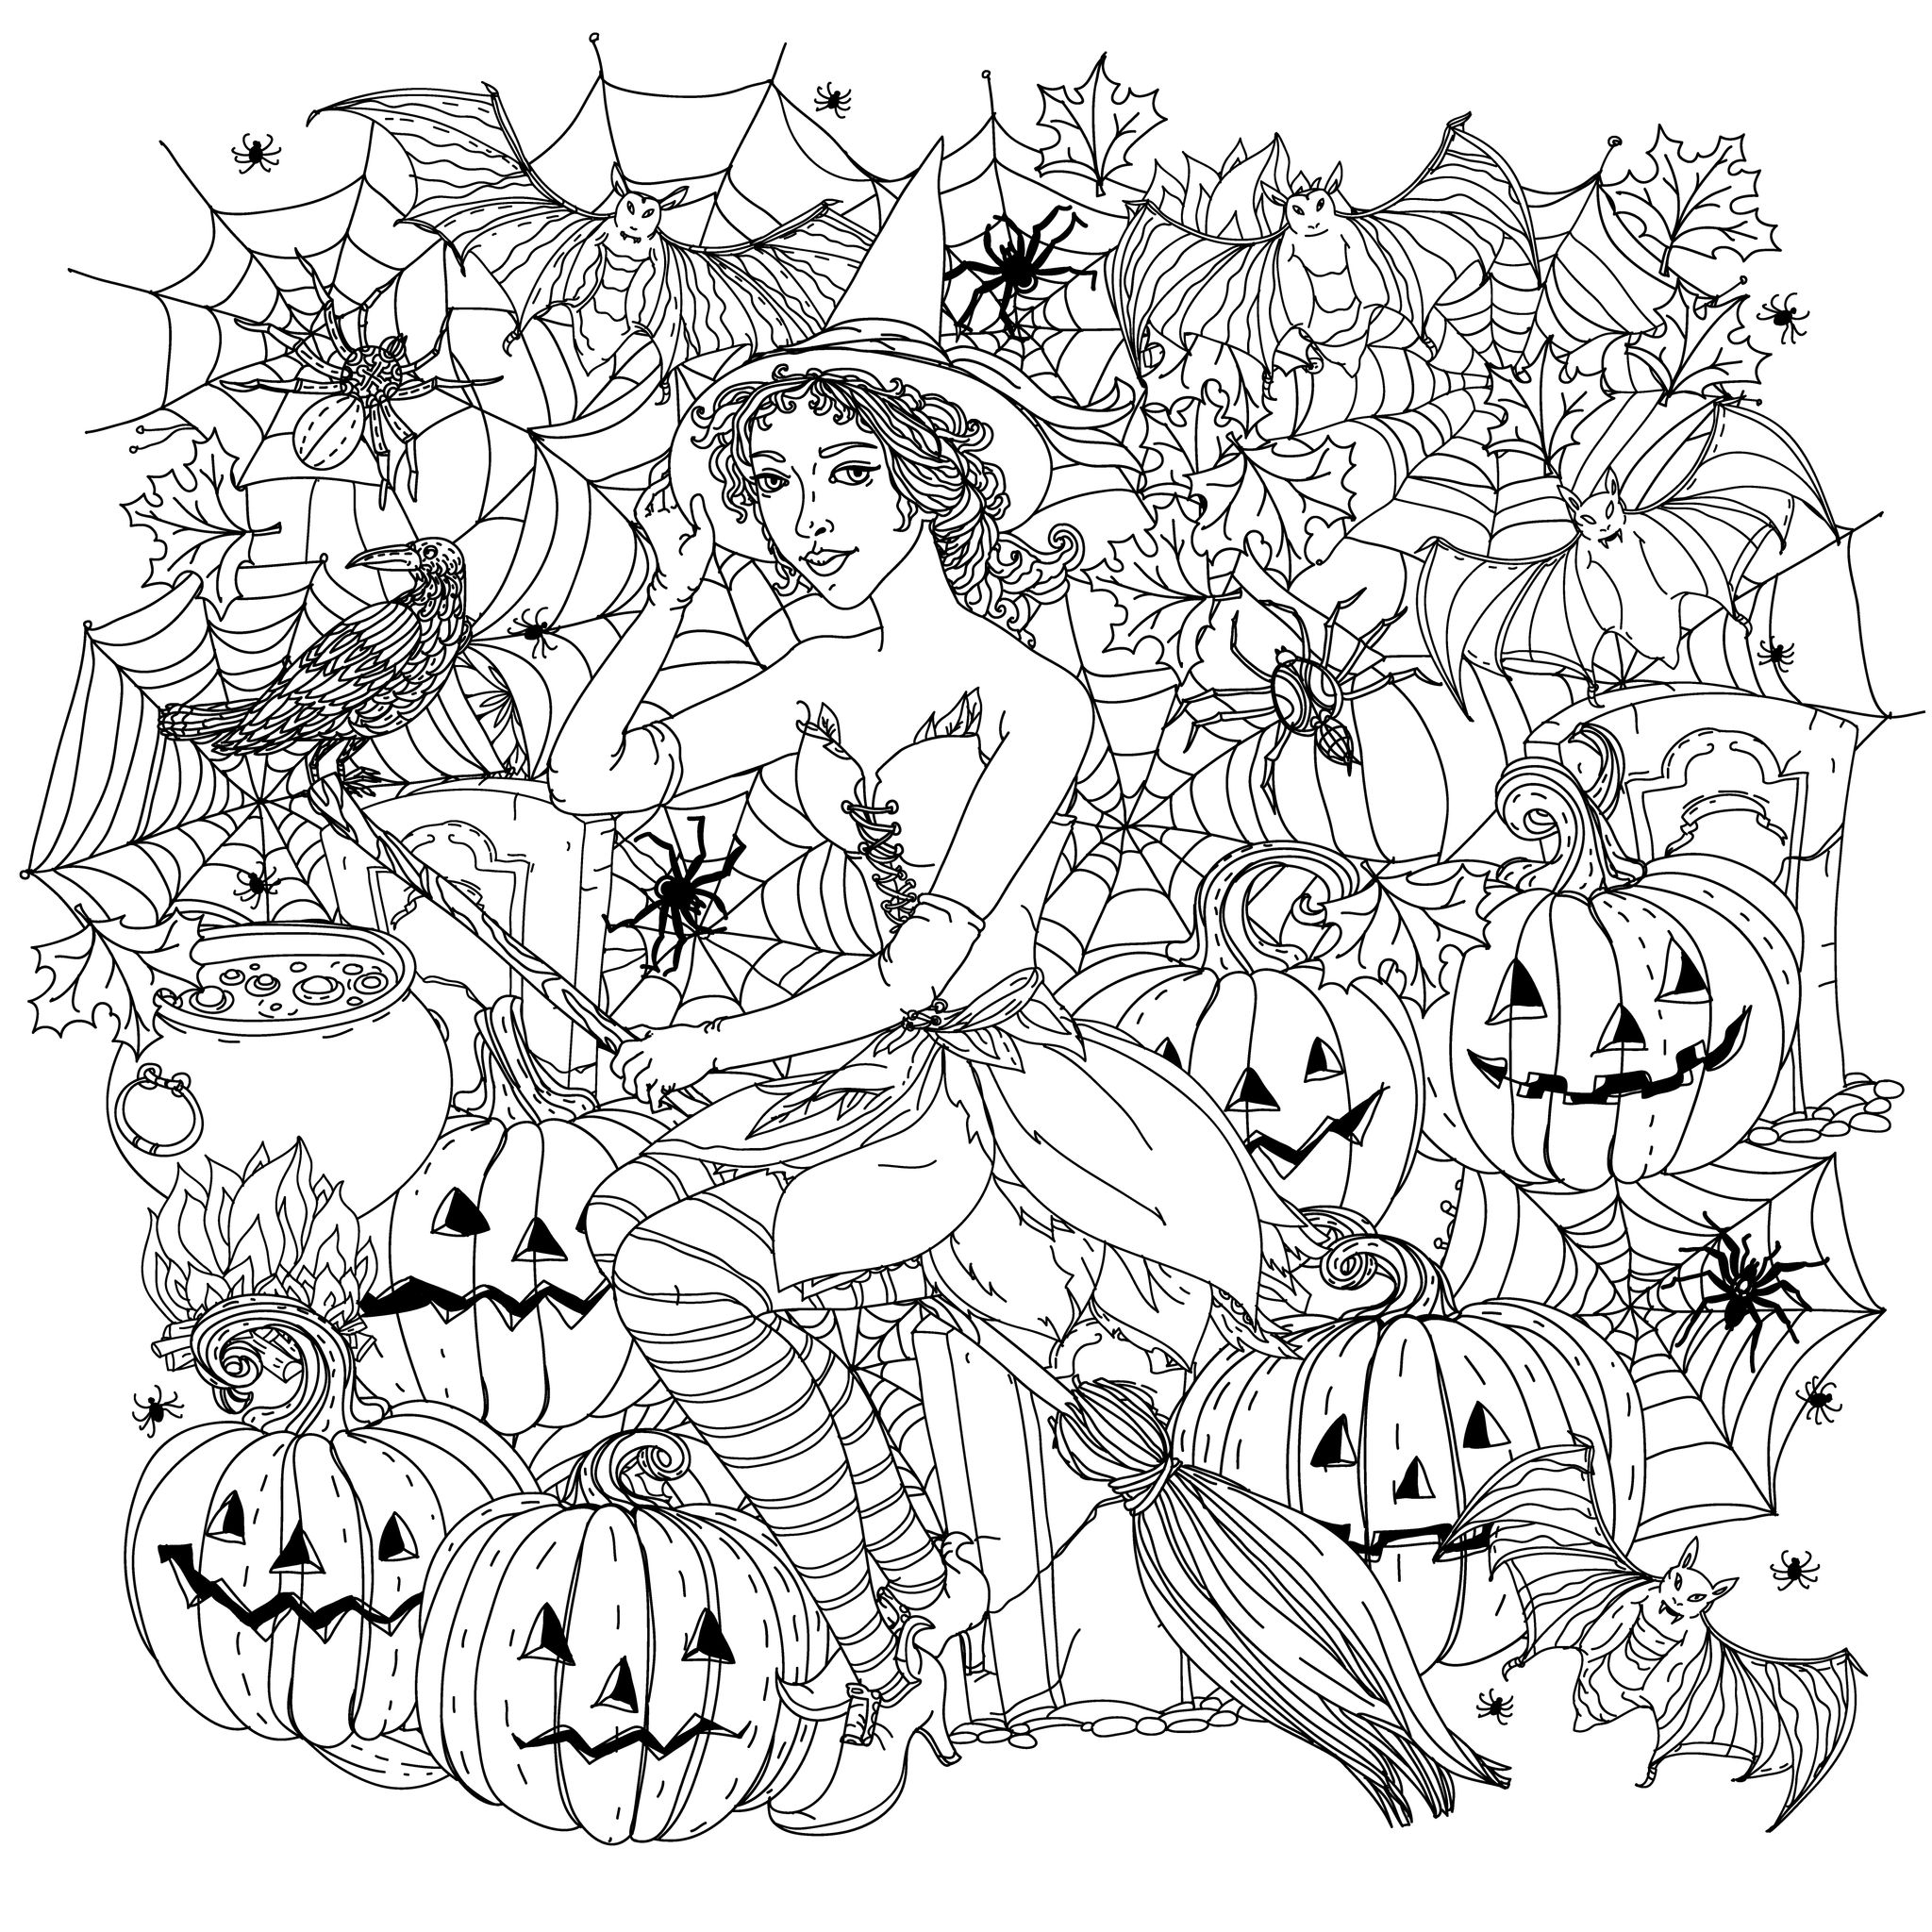 Witch - Coloring Pages for Adults